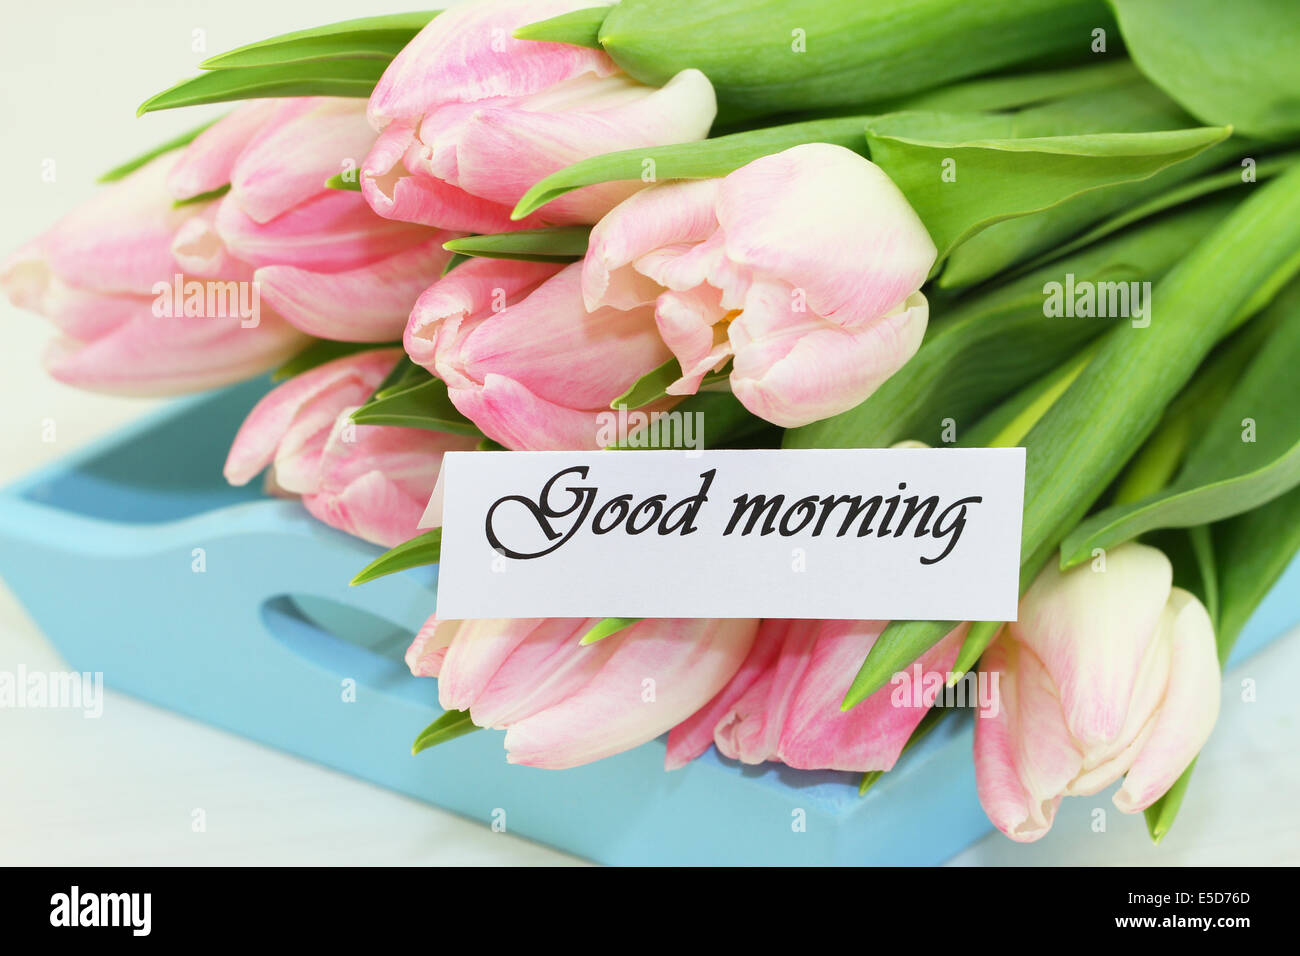 Good morning card with pink tulips Stock Photo